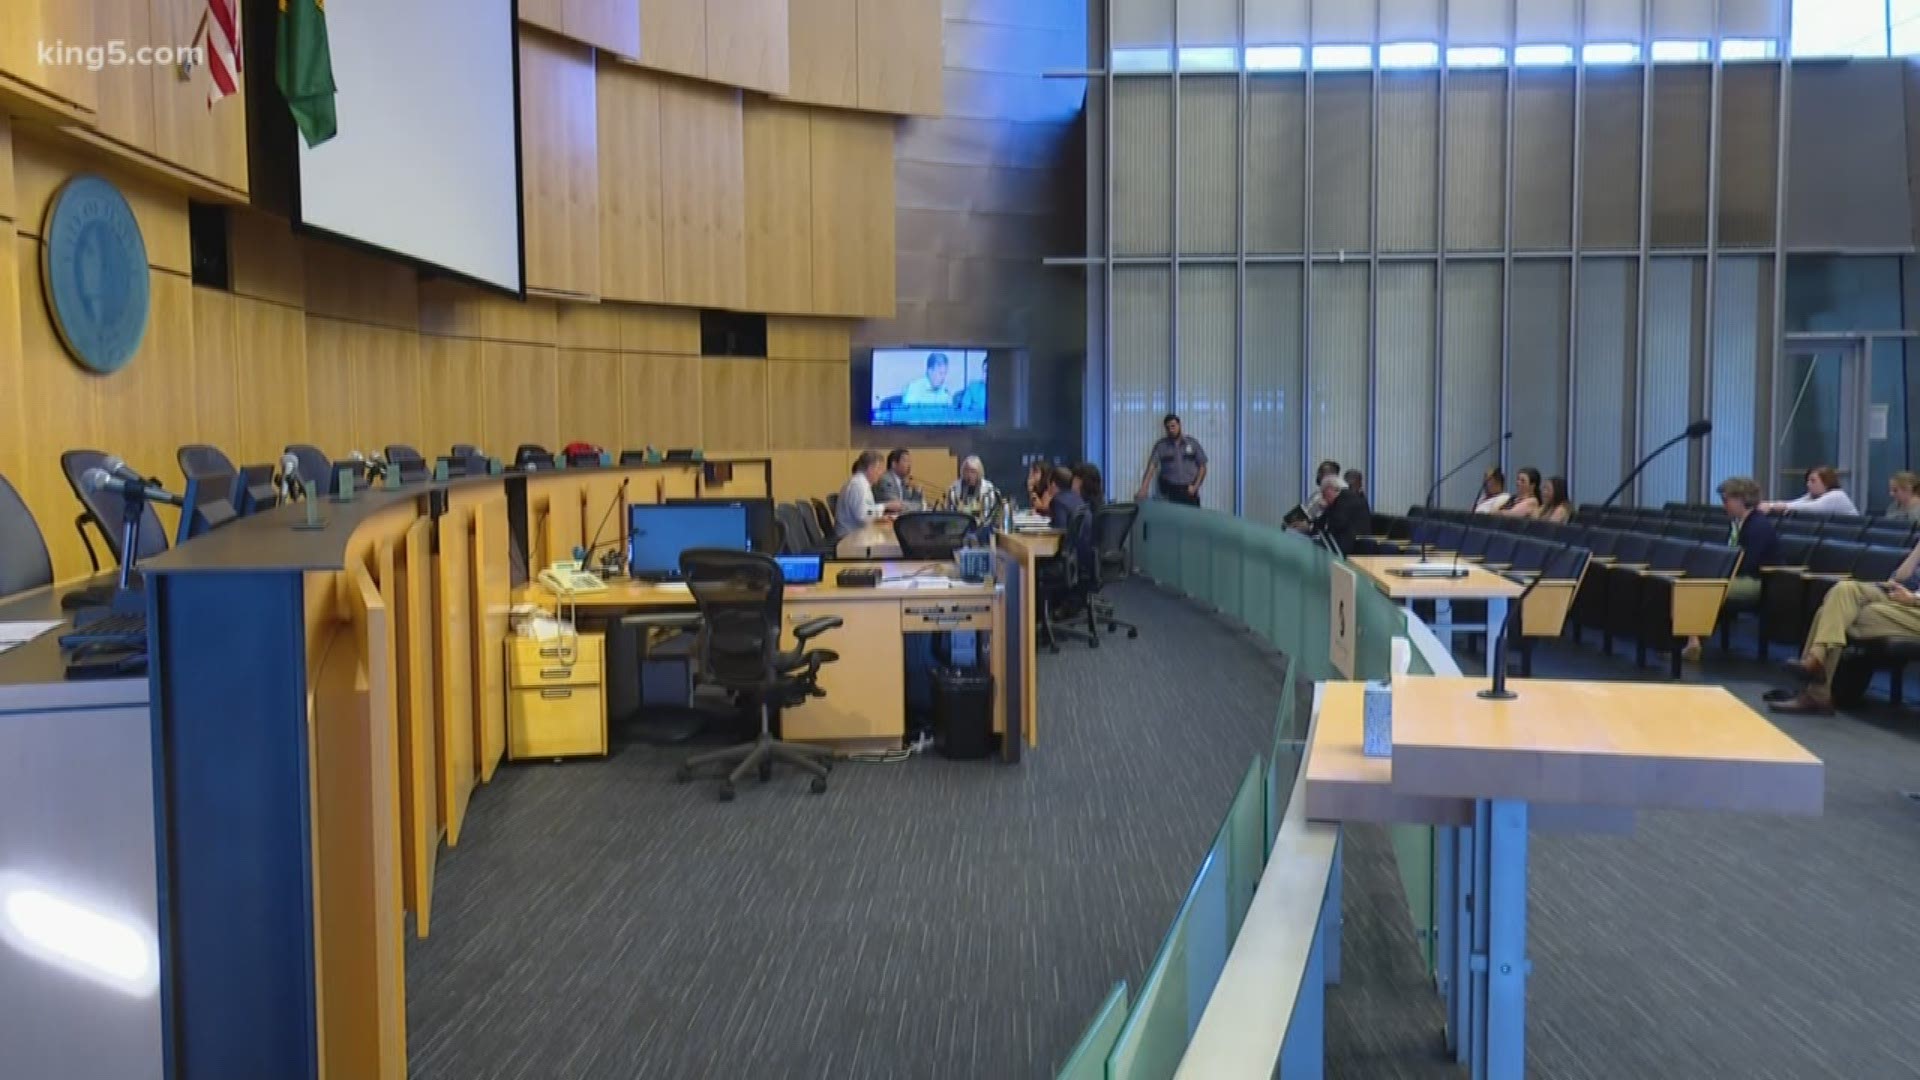 The Seattle City Council is debating what to do with the several million dollar surplus from the city's sweetened beverage tax.